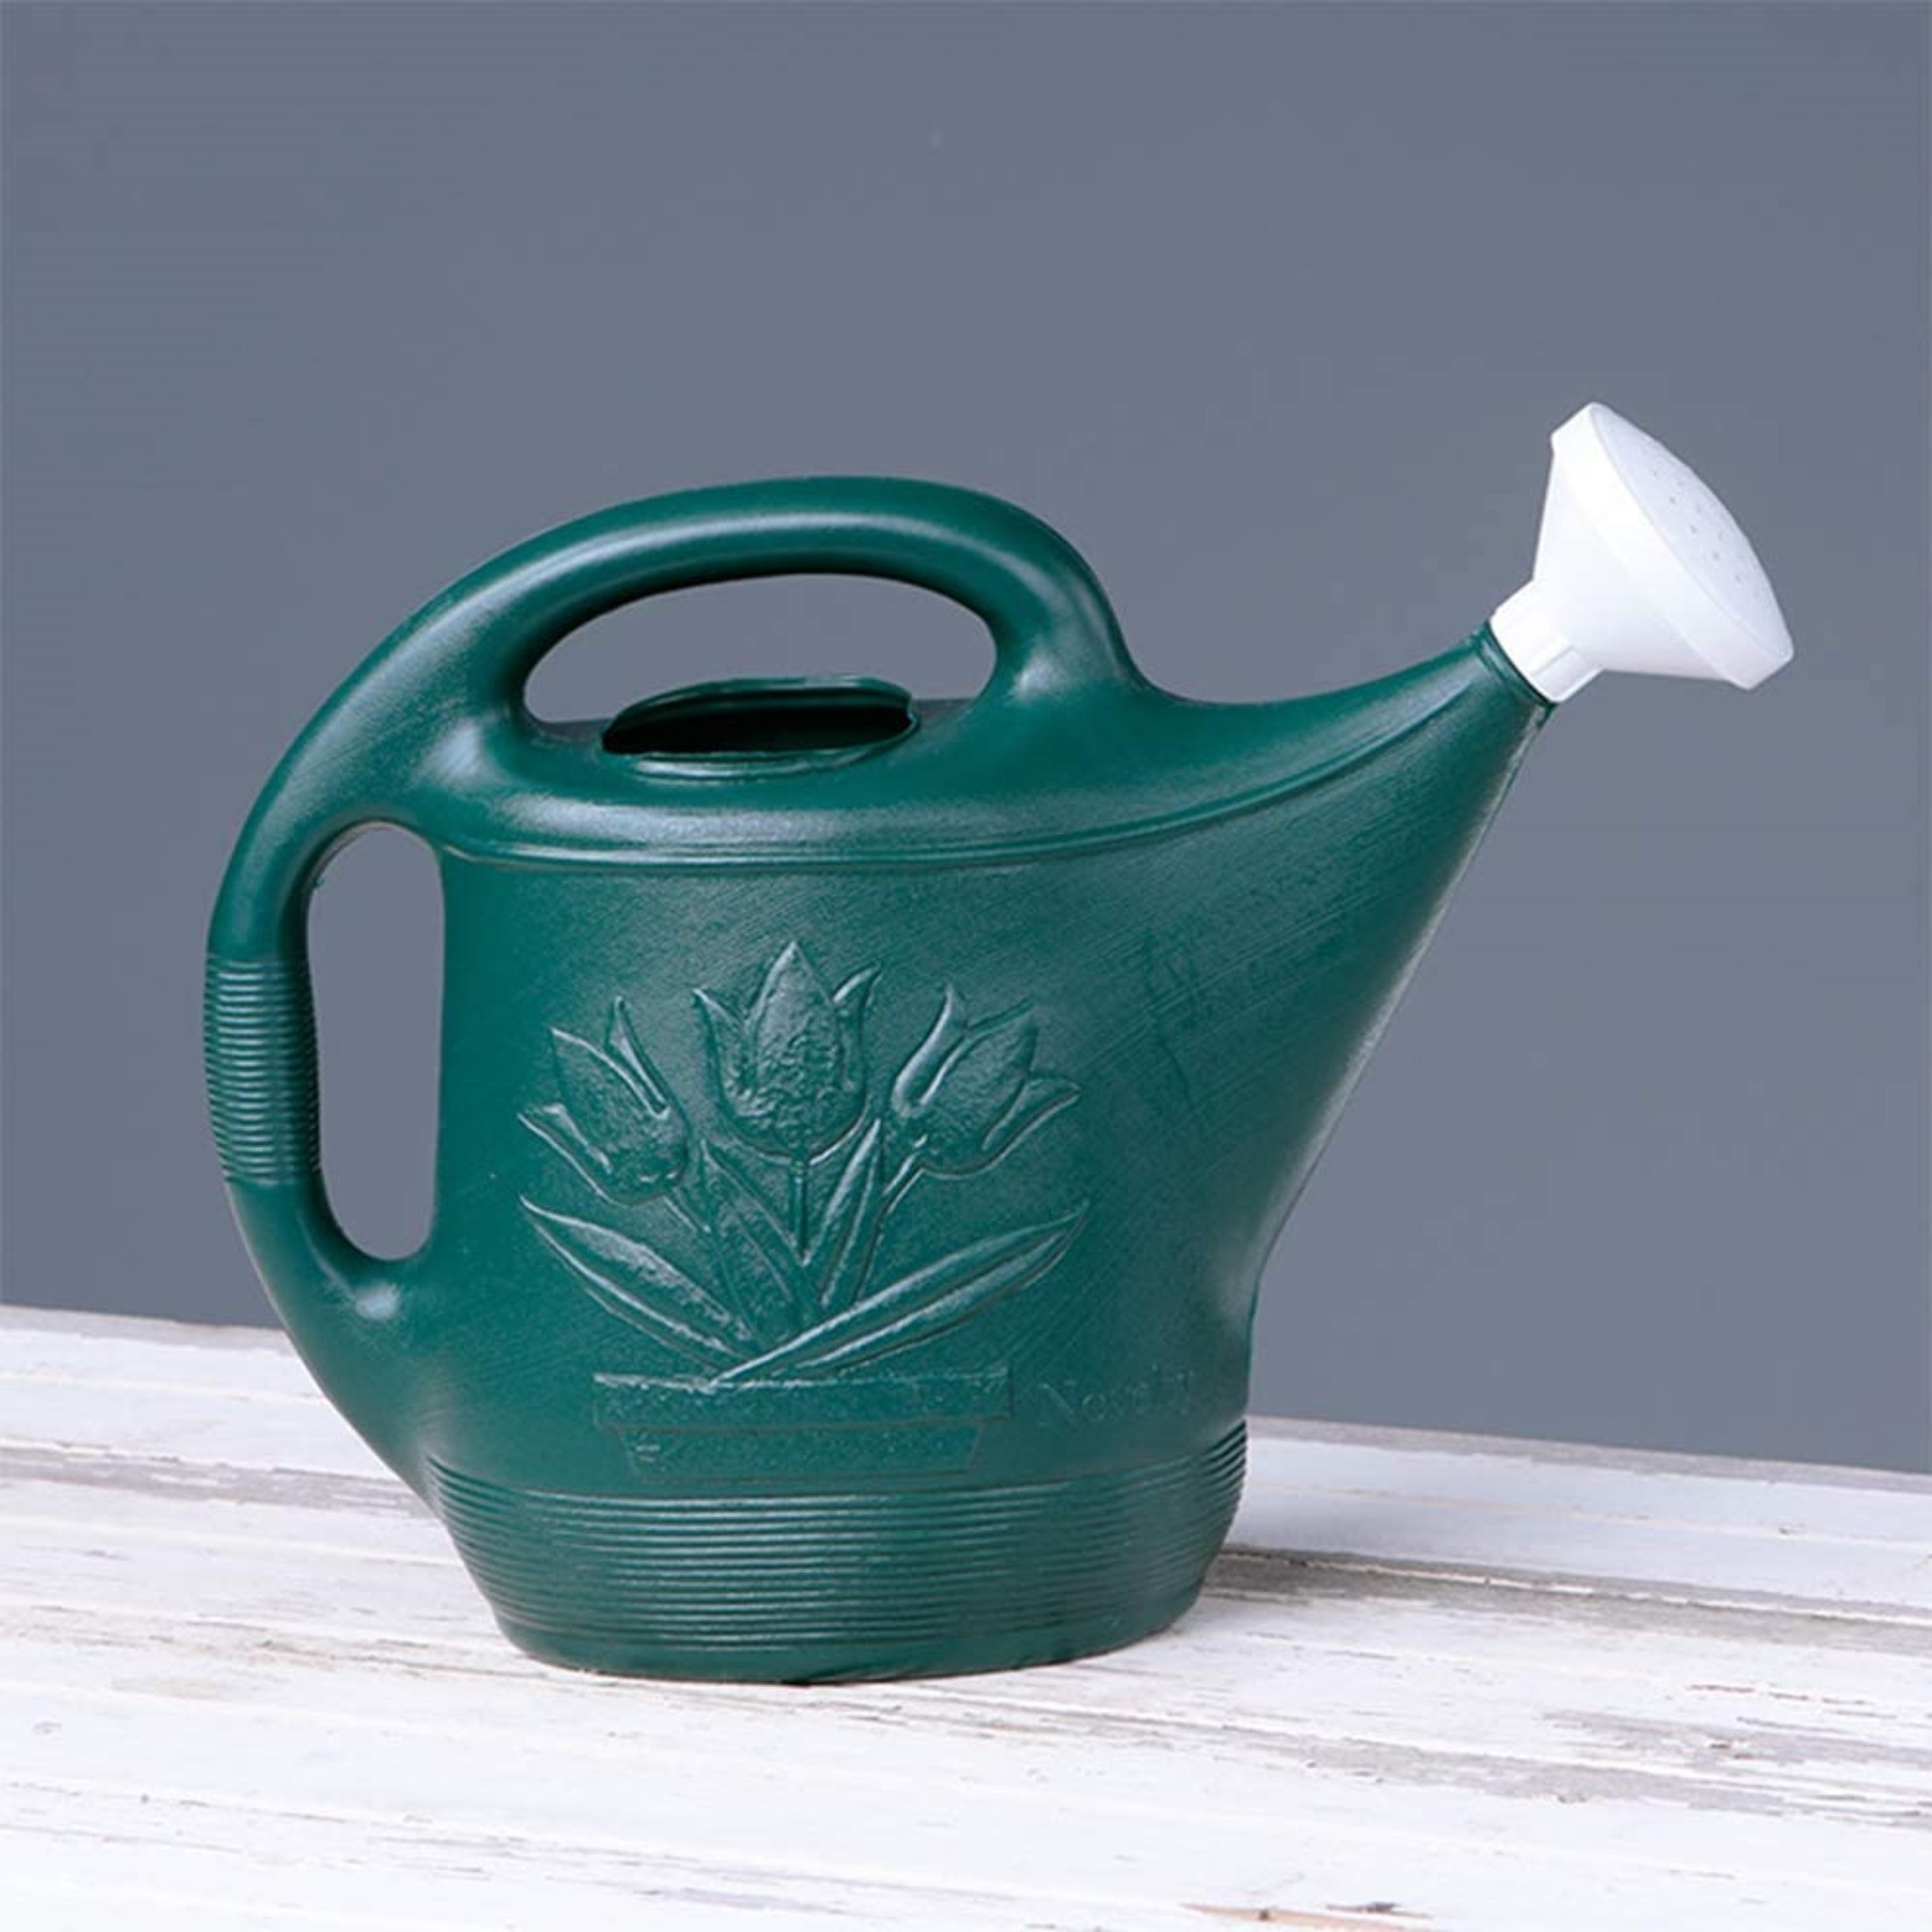 Novelty Classic Plastic Watering Can, Green, 2 Gallon